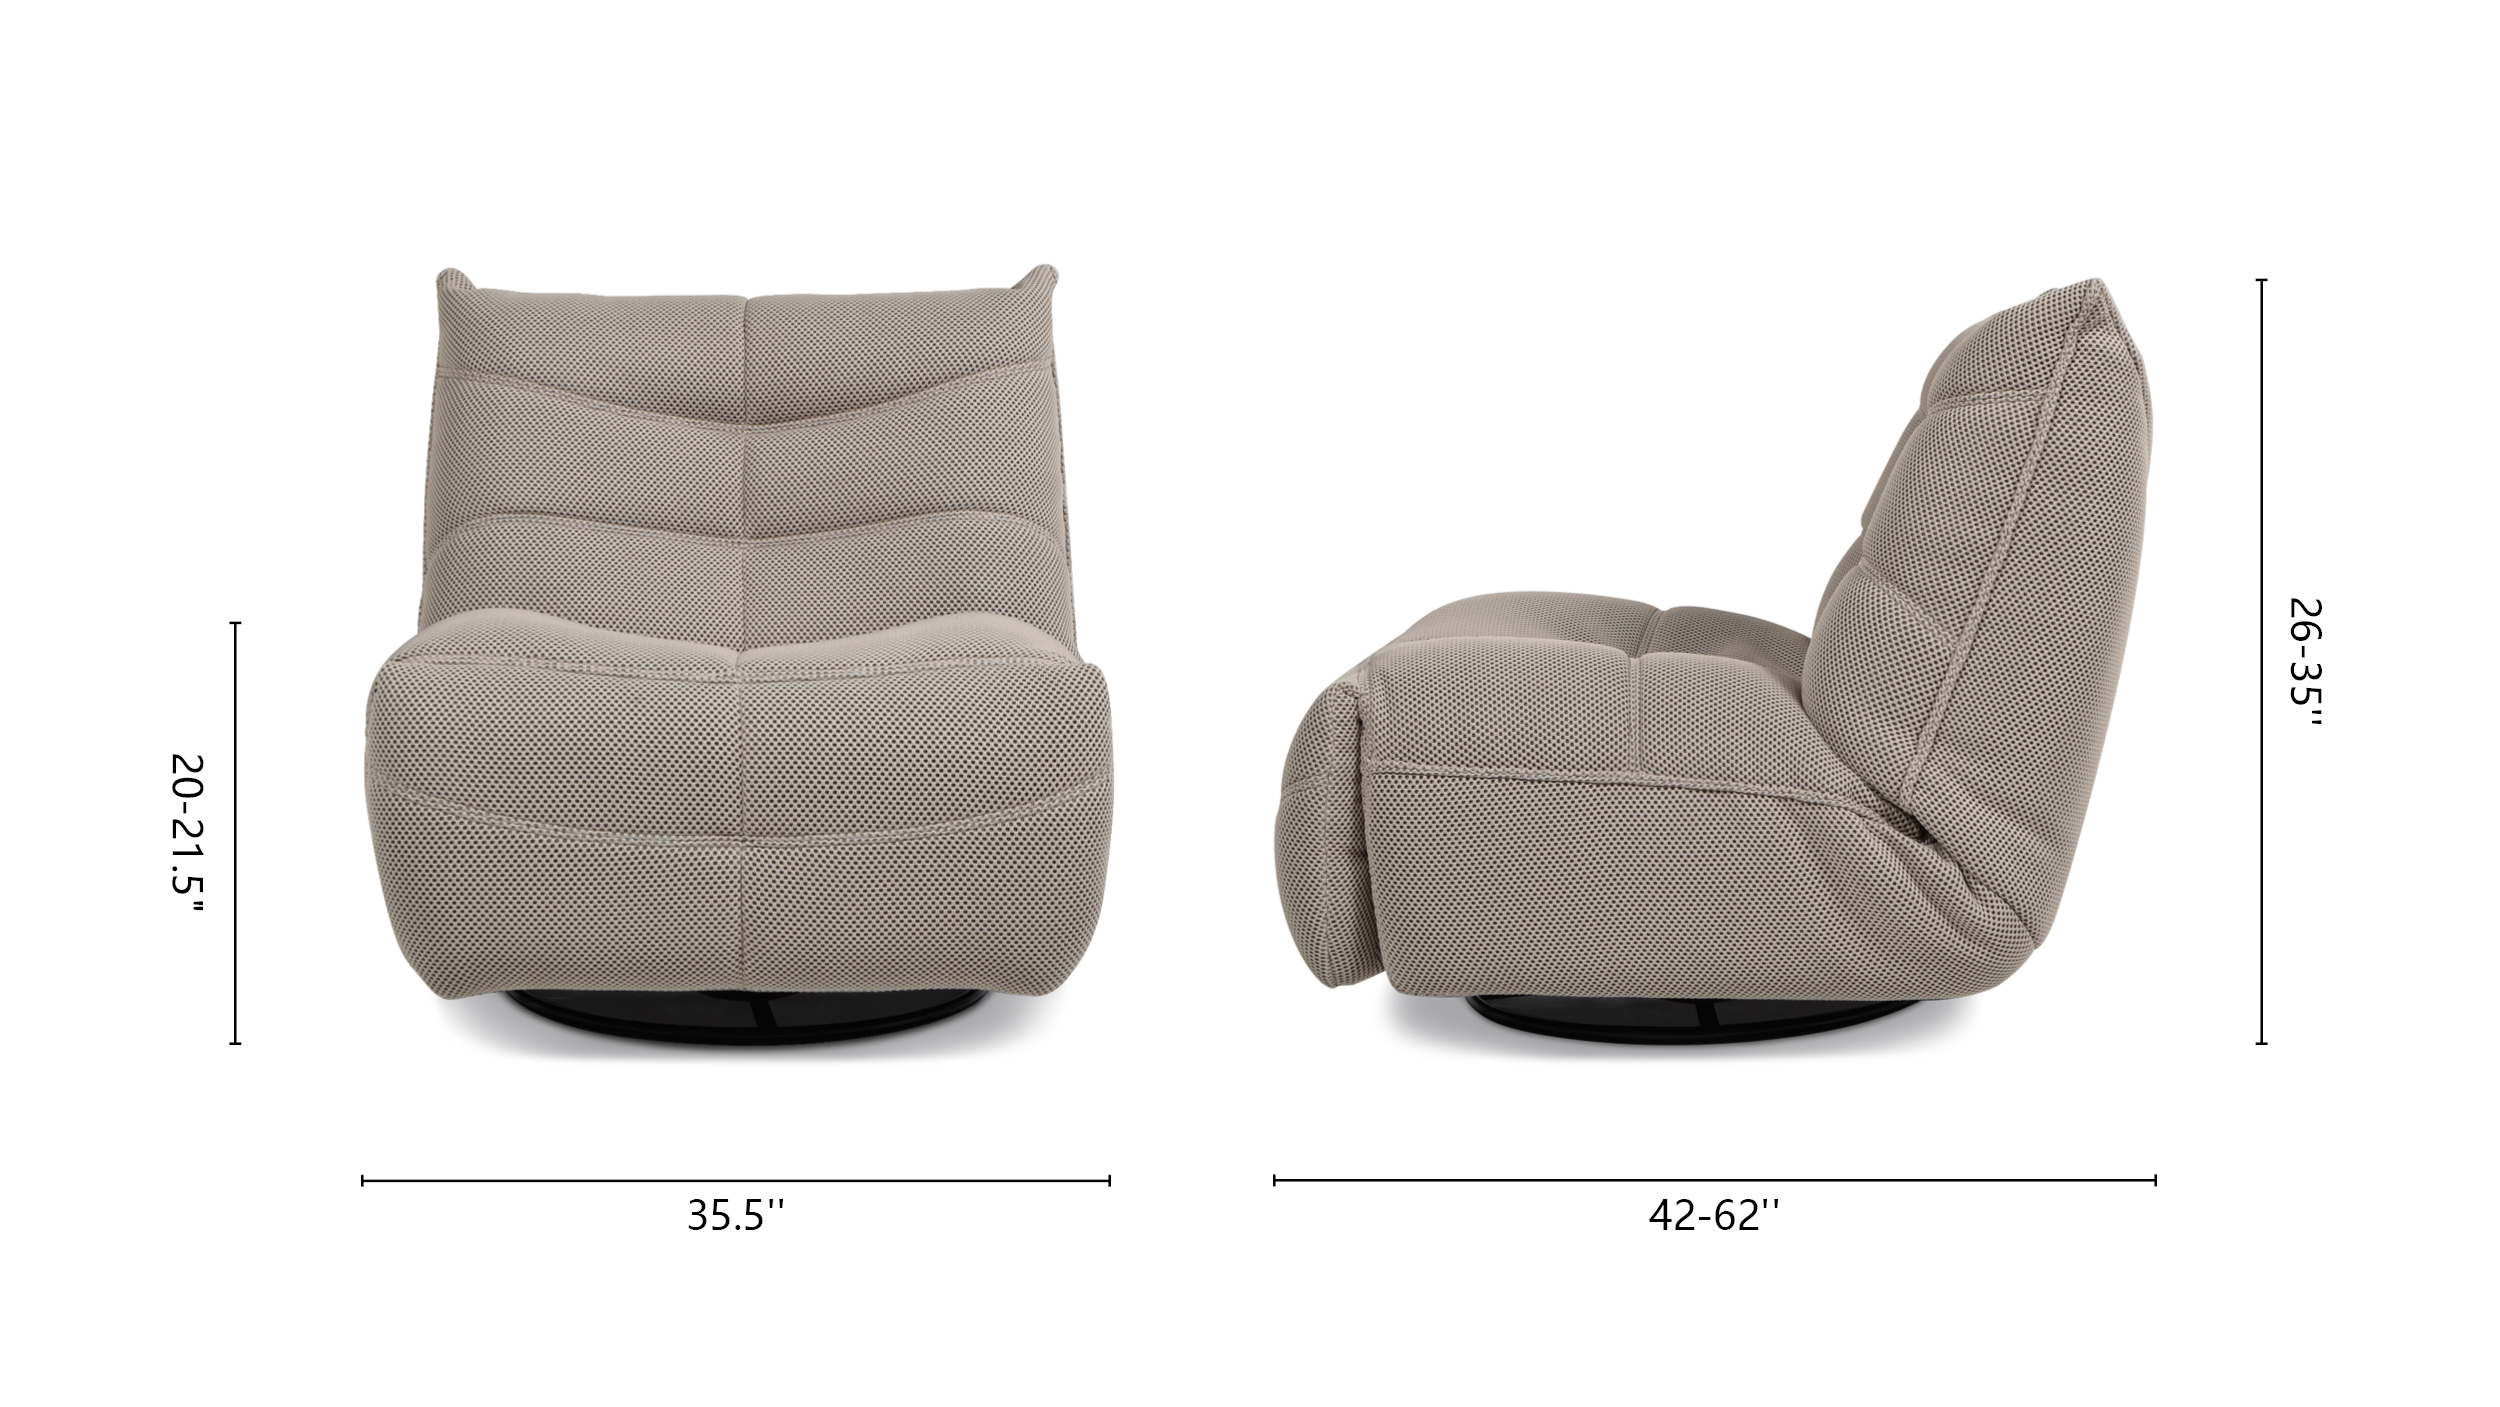 Rearden Swivel Glider Manual Recliner Armless Lounge Chair, Cement Gray